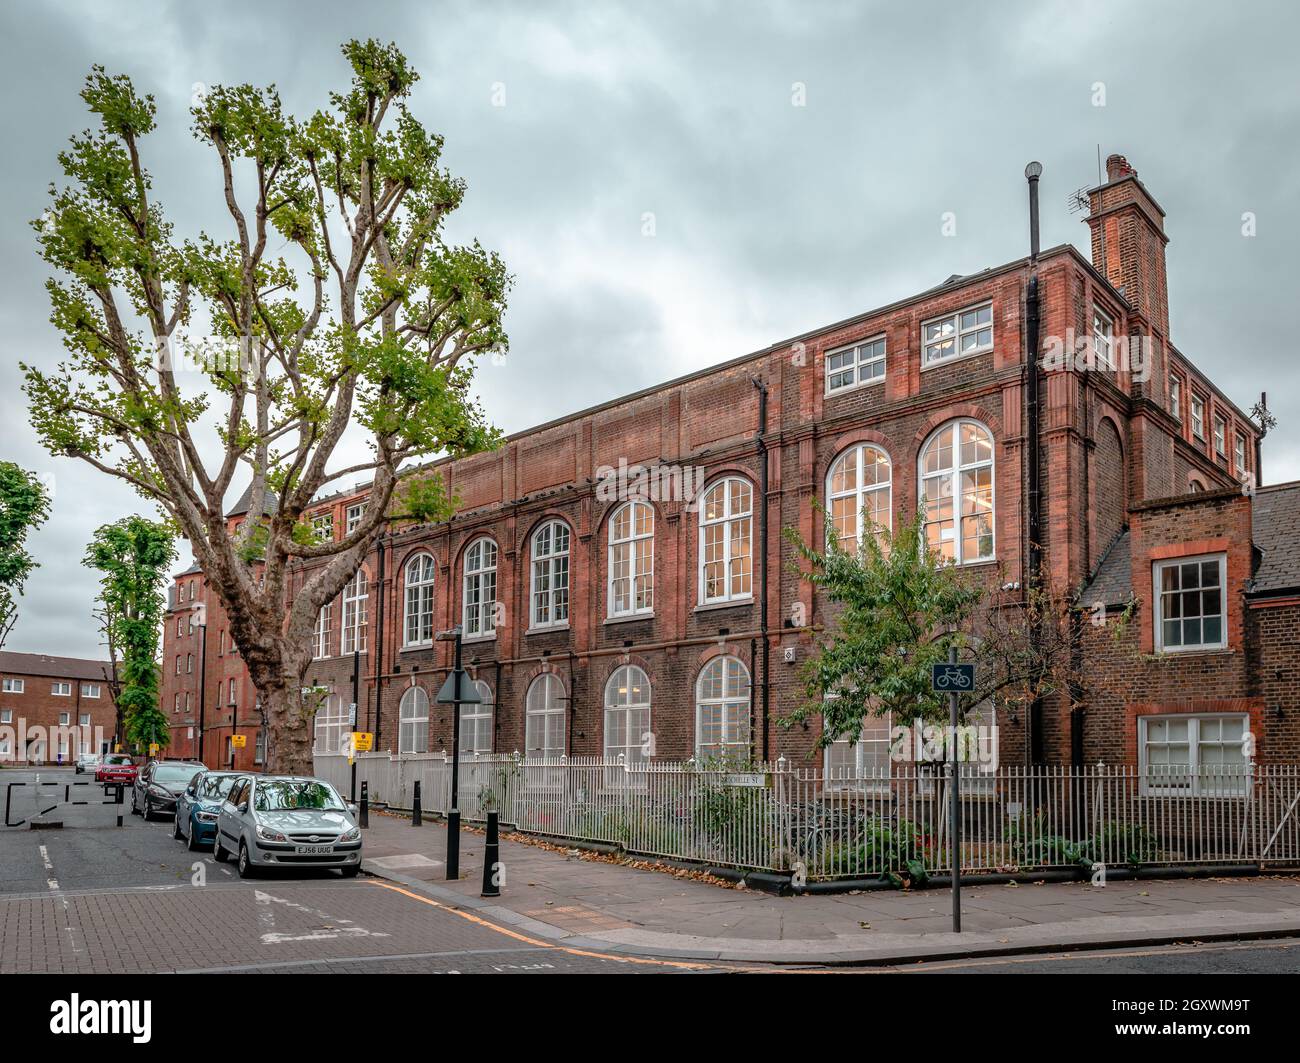 Rochelle Street Primary School, in Arnold Circus, Weavers, Tower Hamlets. Grade II listed building. Once a school, now it is a community arts facility. Stock Photo